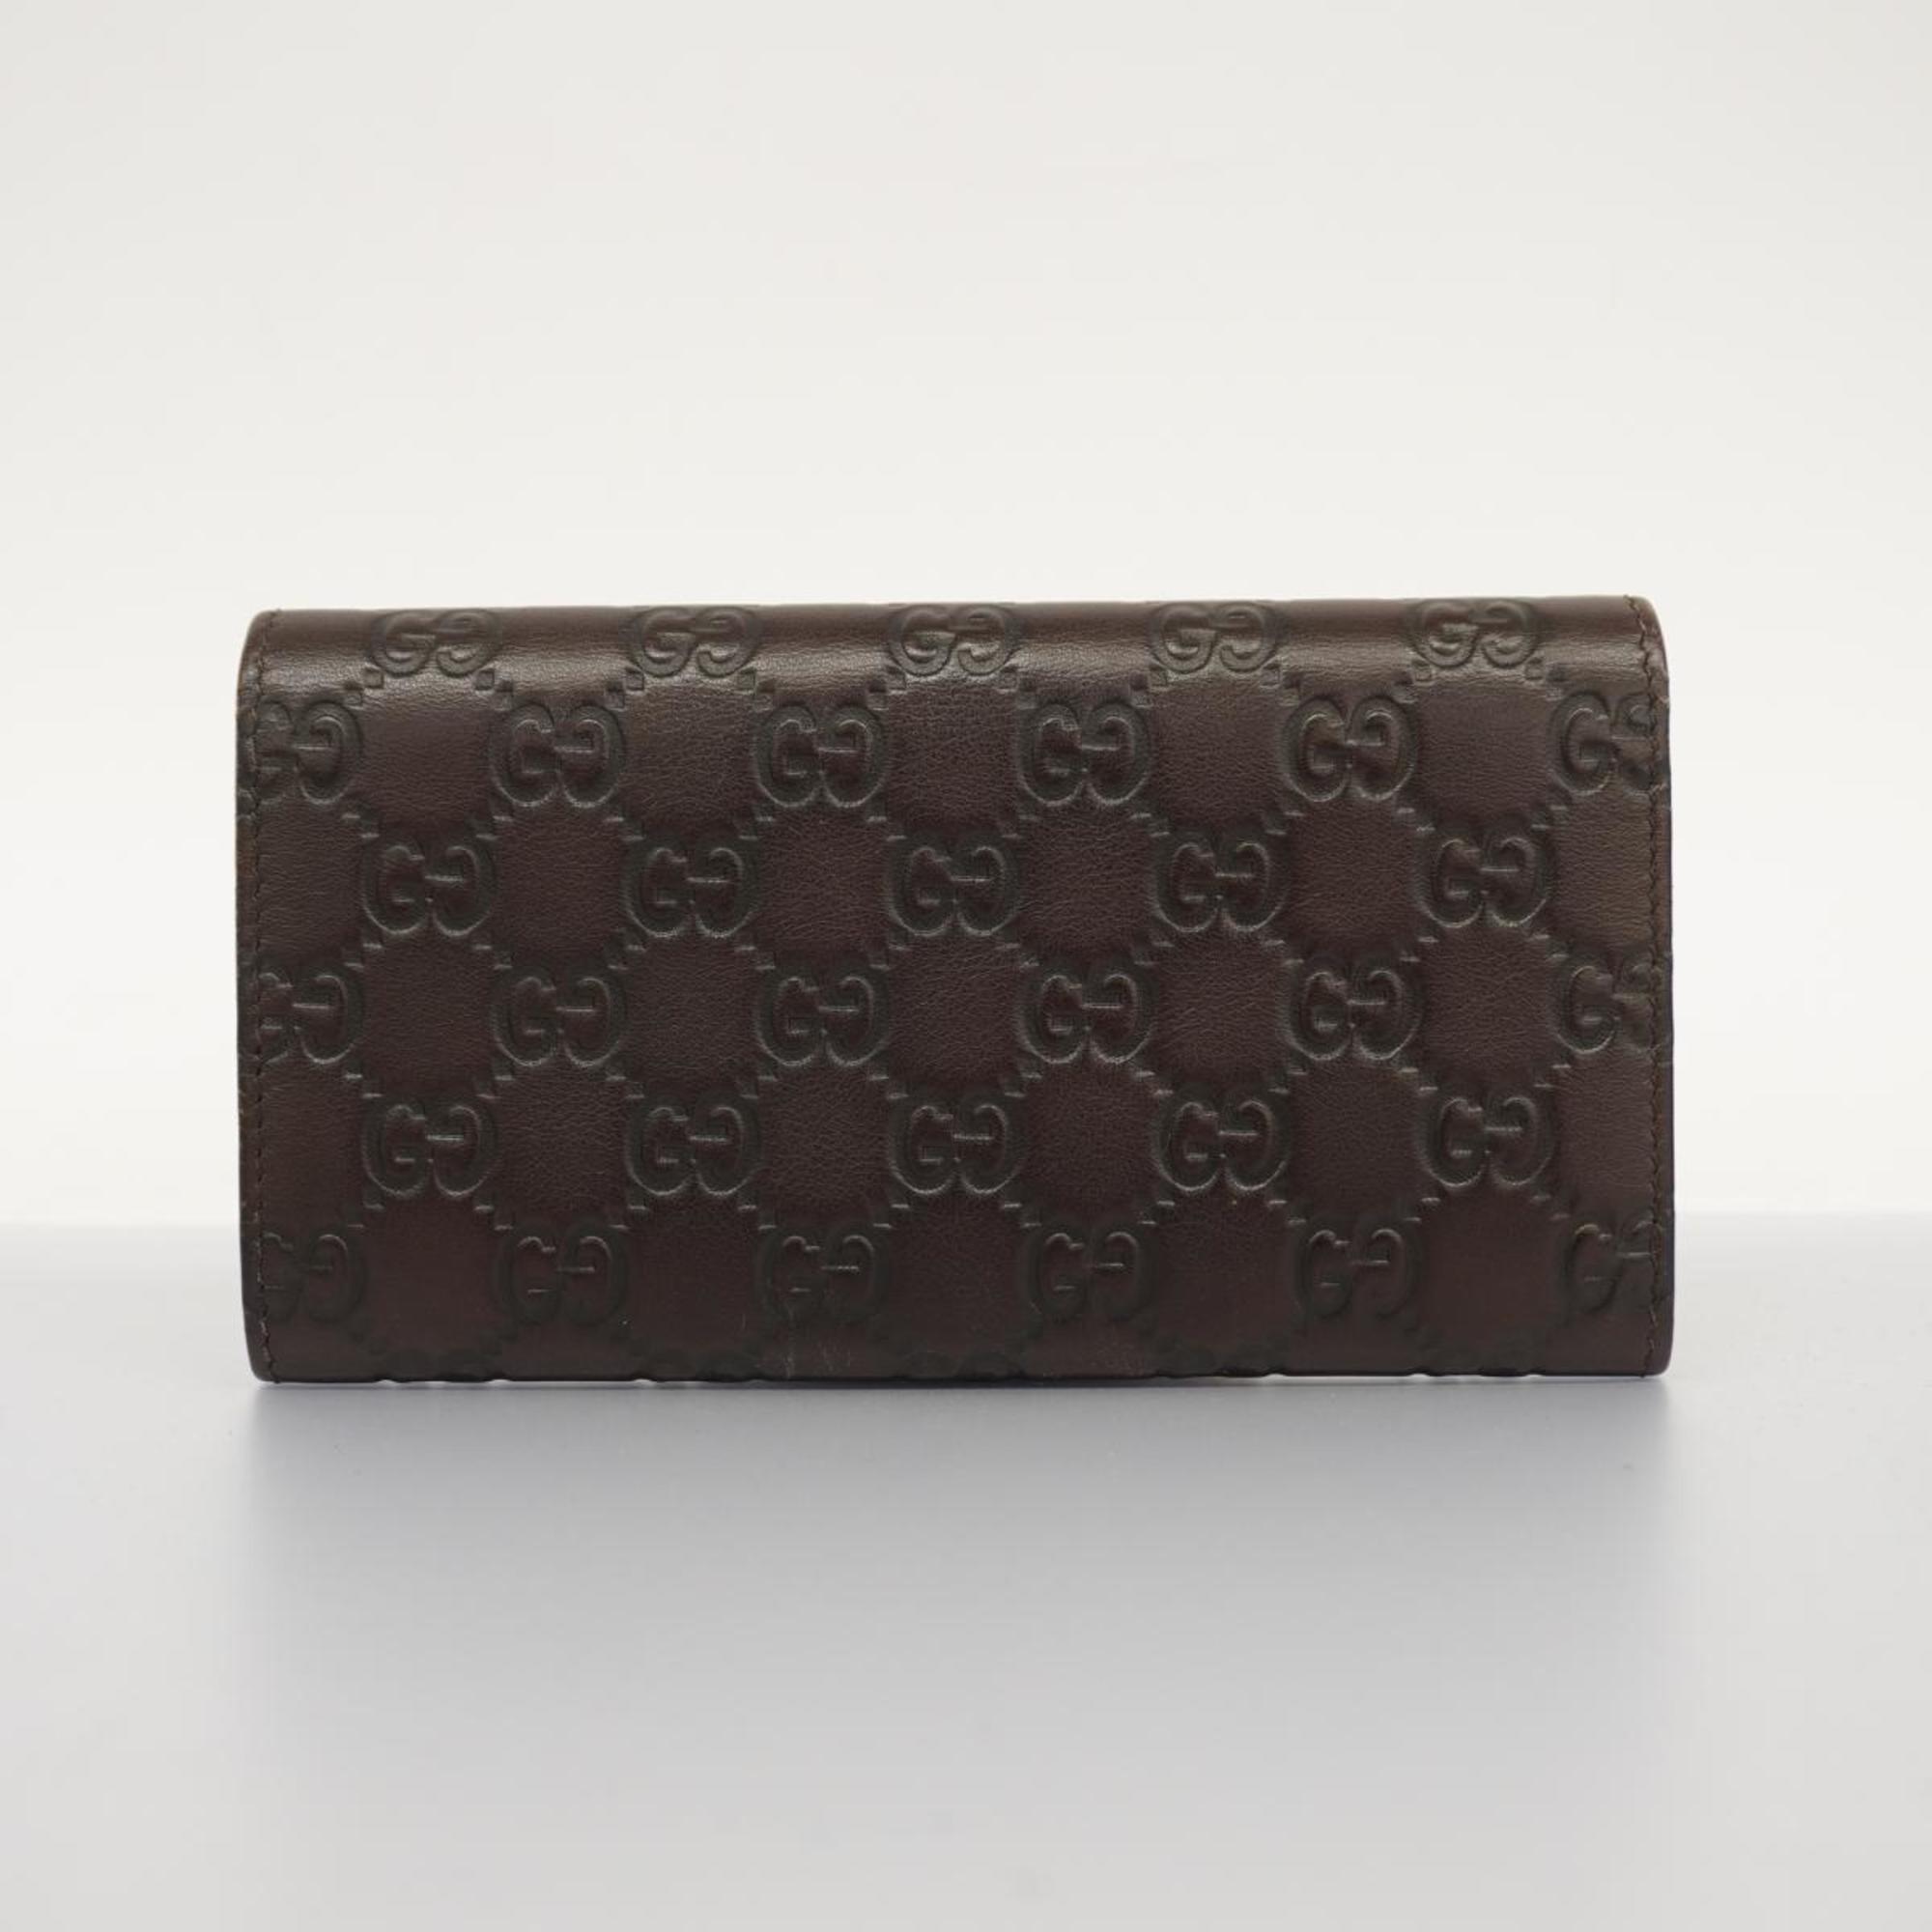 Gucci Long Wallet Guccissima 244946 Leather Brown Men's Women's